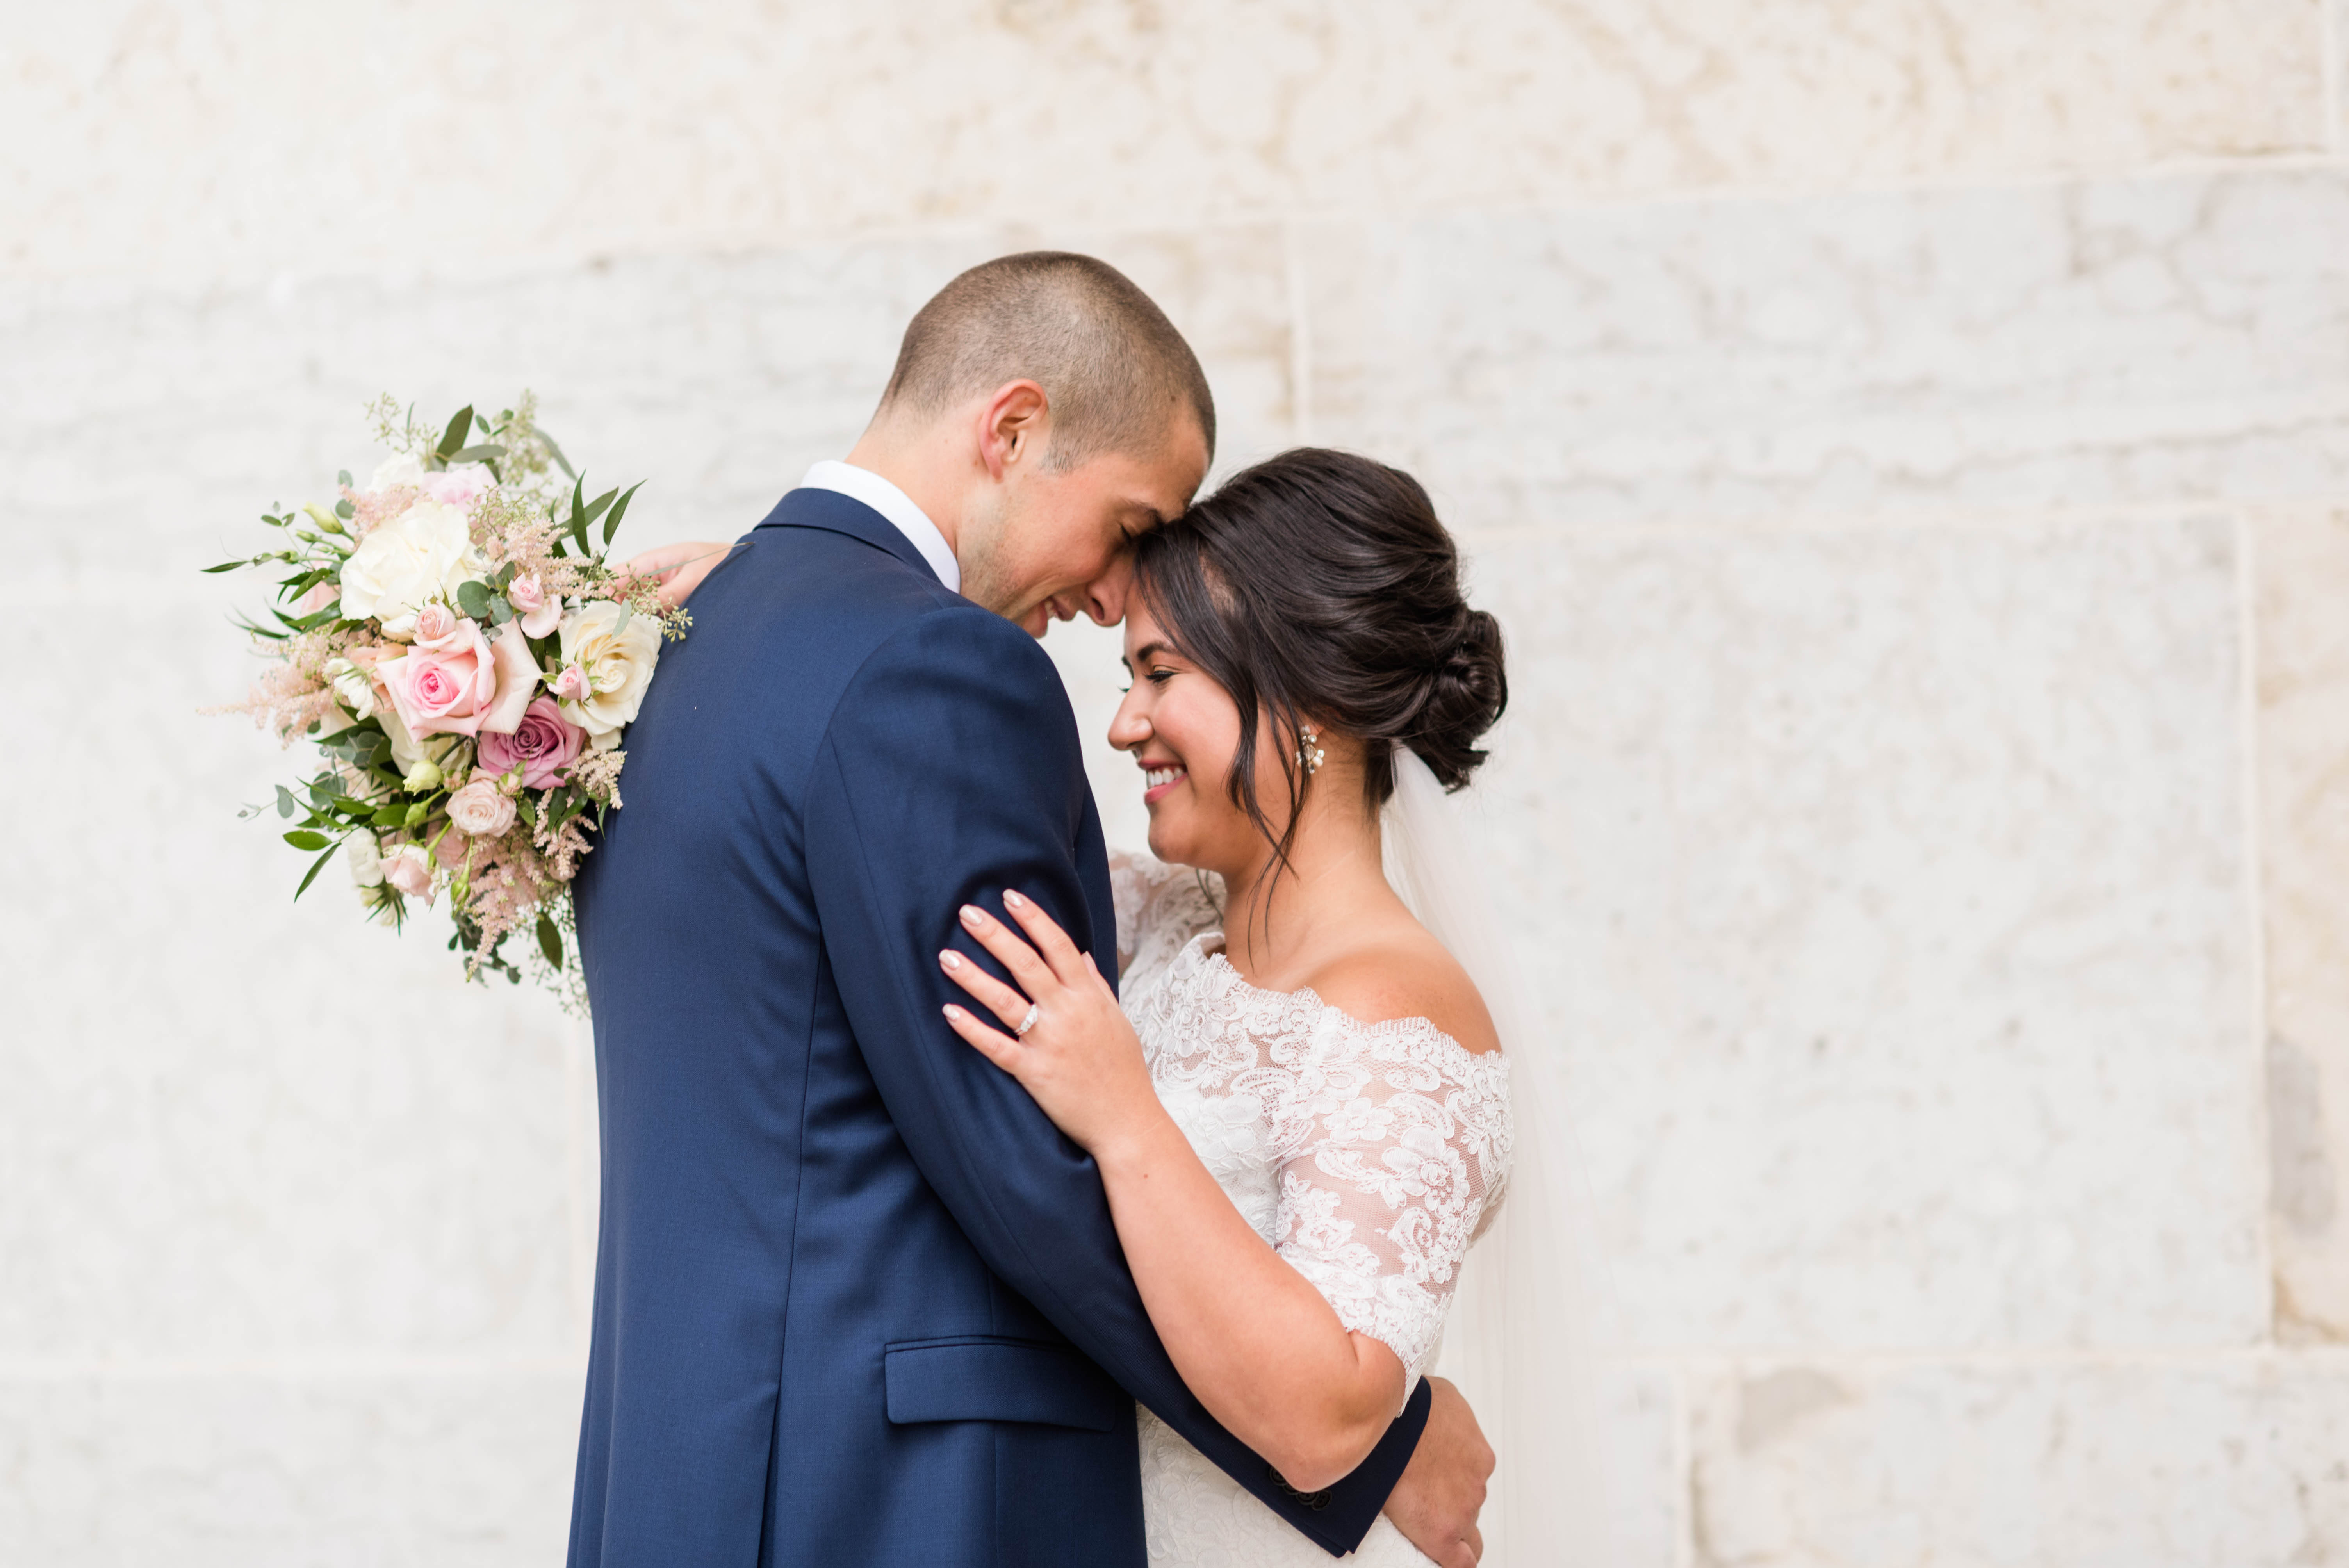 Olivia and Corbin: Fall Wedding At The Statehouse